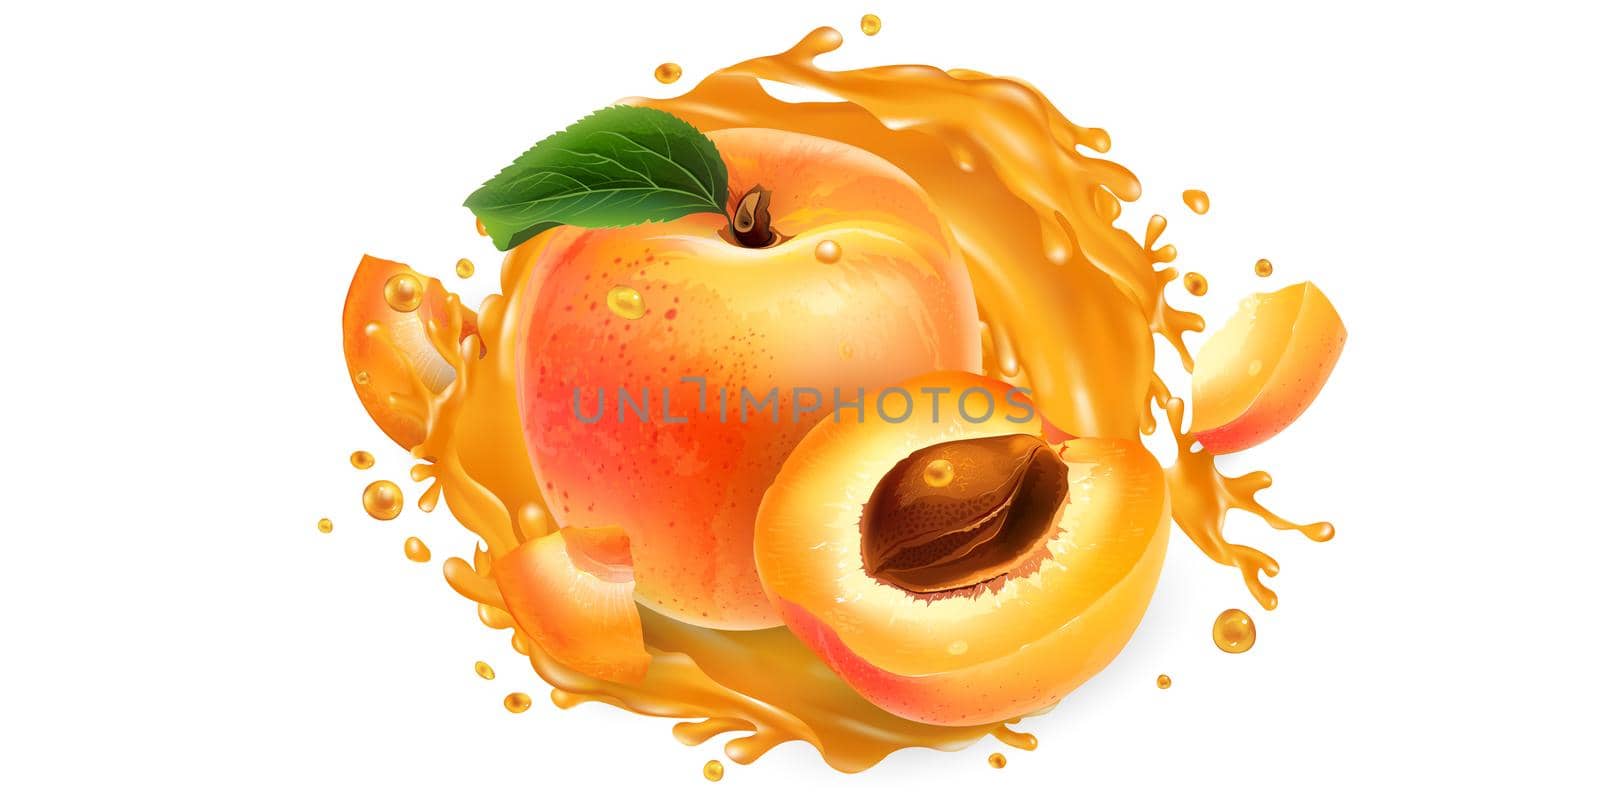 Fresh apricots and a splash of fruit juice on a white background. Realistic style illustration.